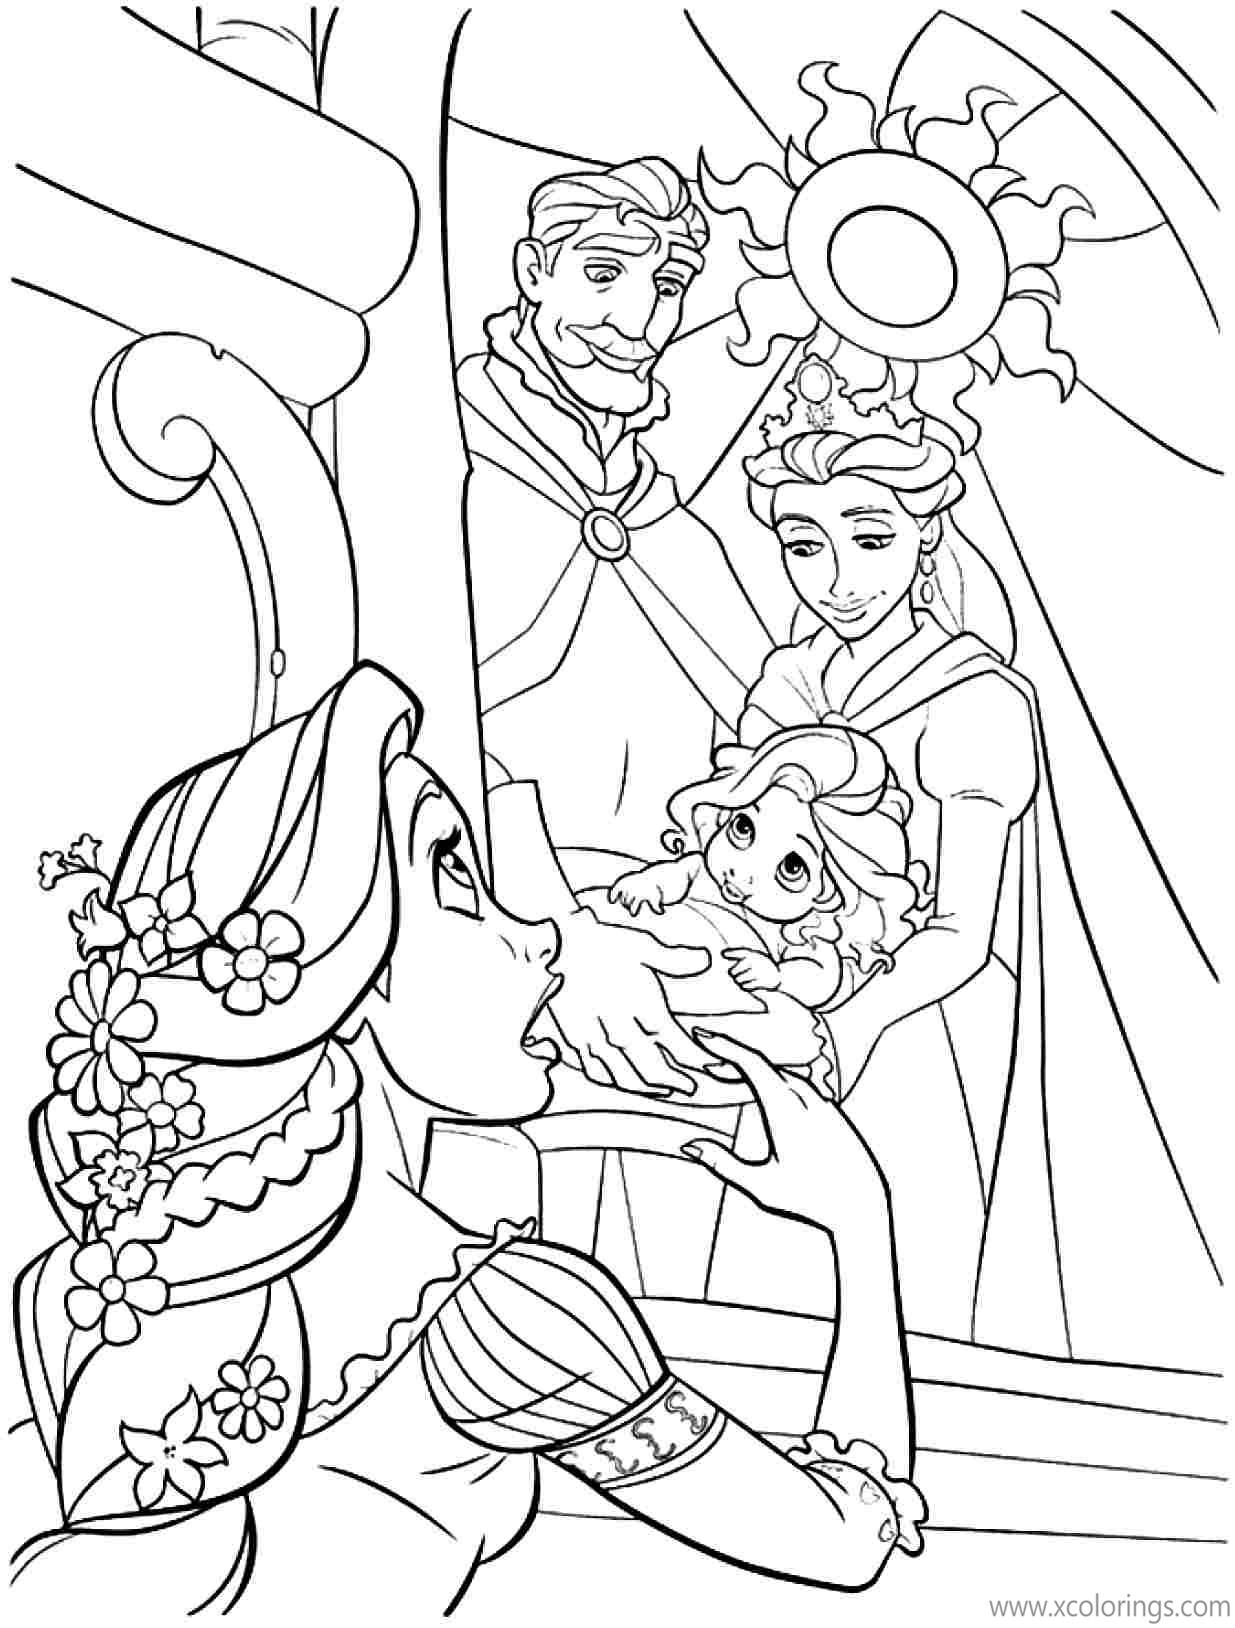 Free Baby Rapunzel Coloring Pages printable